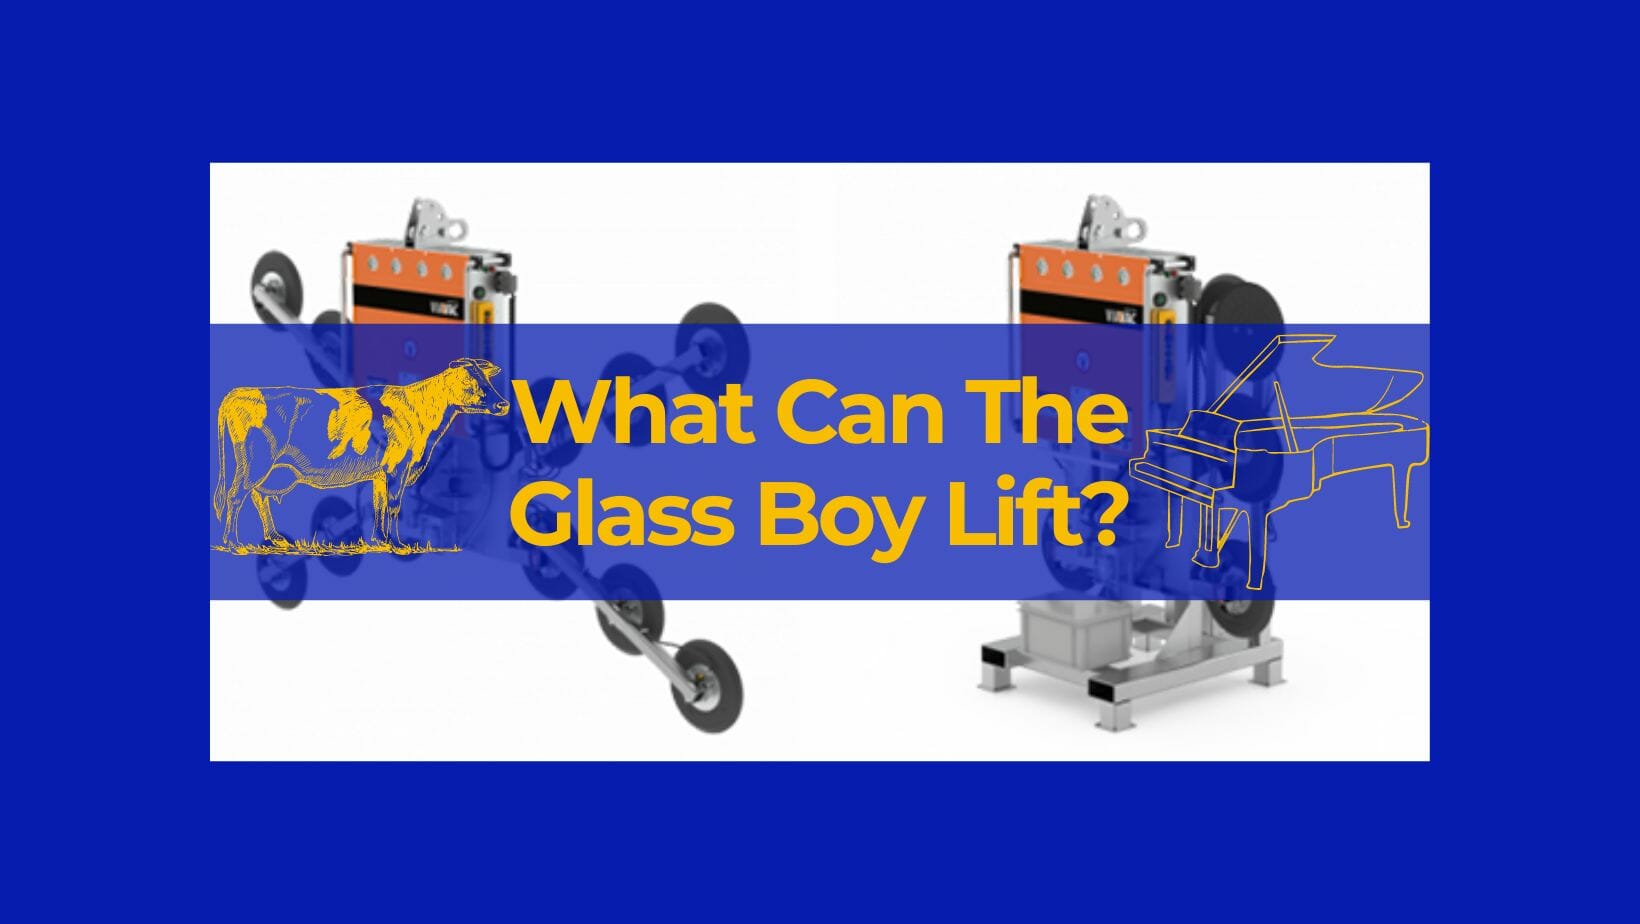 What Can A Glass Boy Lift?